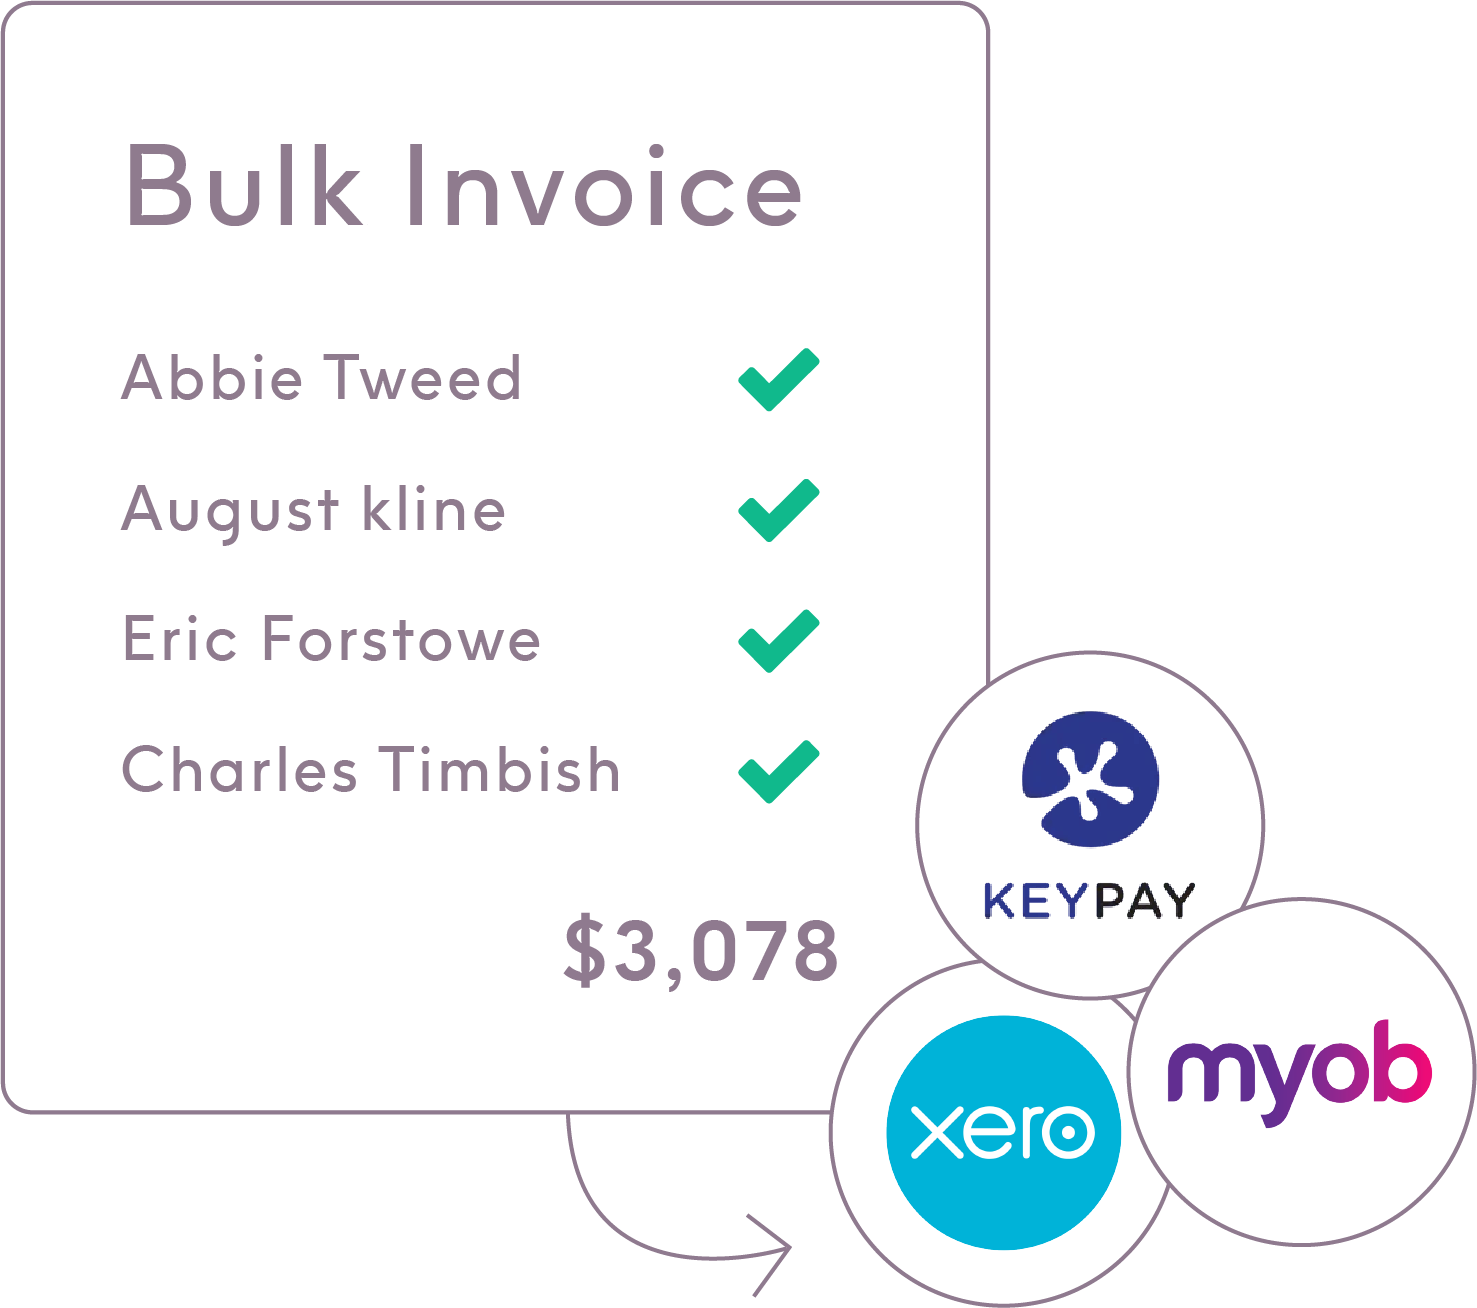 ShiftCare's bulk invoicing function for multiple clients which is integrated with accounting systems like MYOB, Xero, and KeyPay